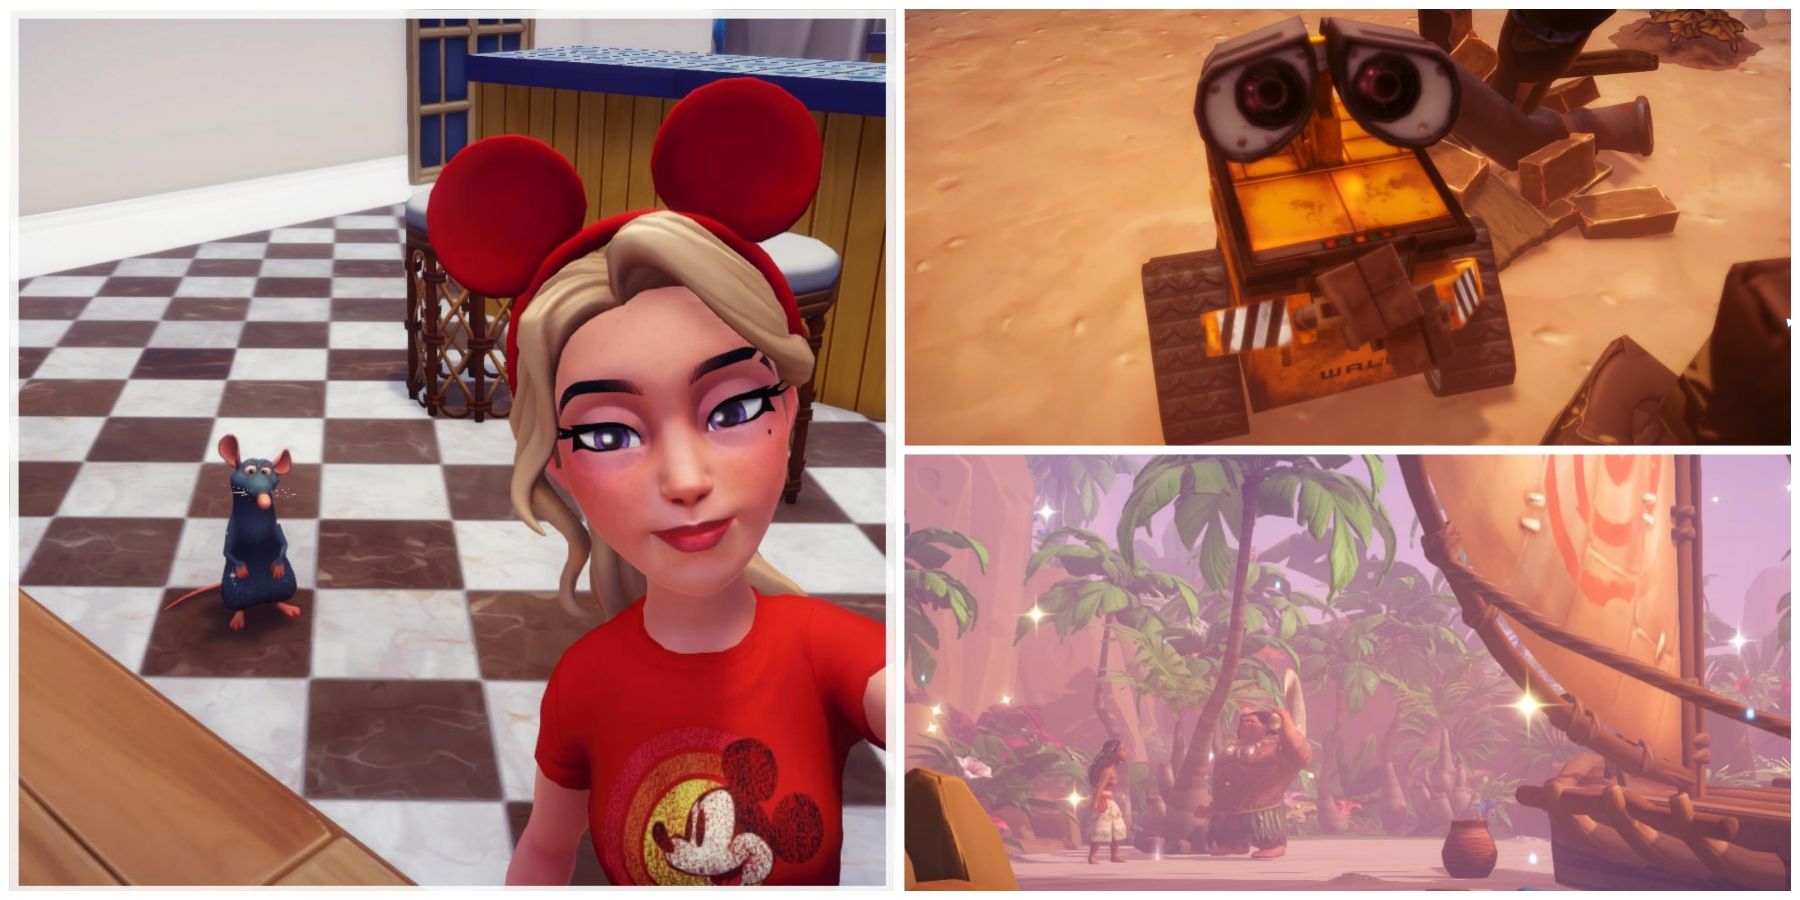 should you visit the shy robot, the little chef, or the demigod in disney dreamlight valley